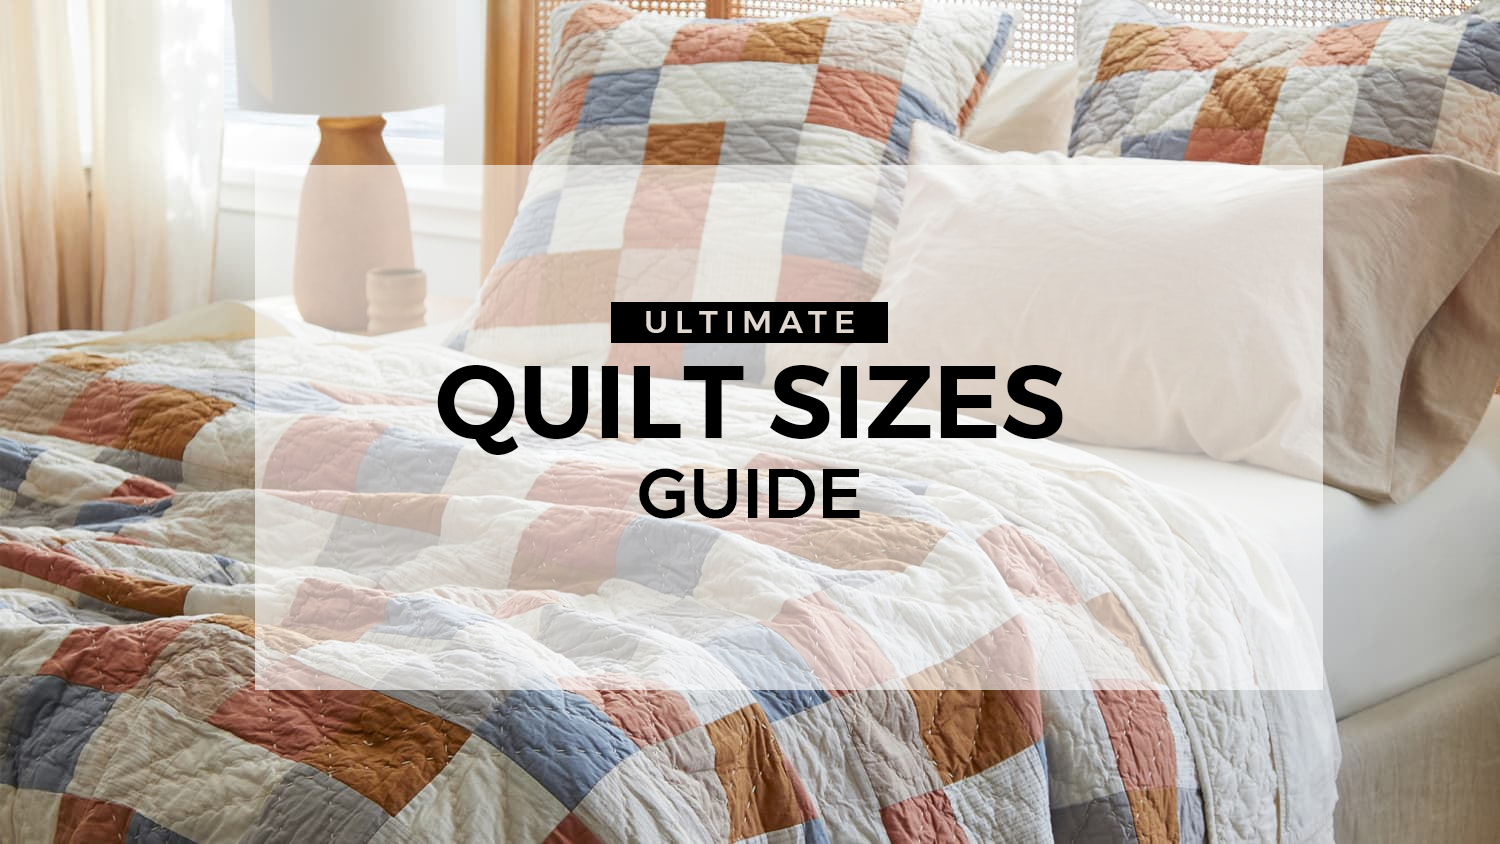 Sew Many Ways: Size Chart For Beds, Quilts and Batting